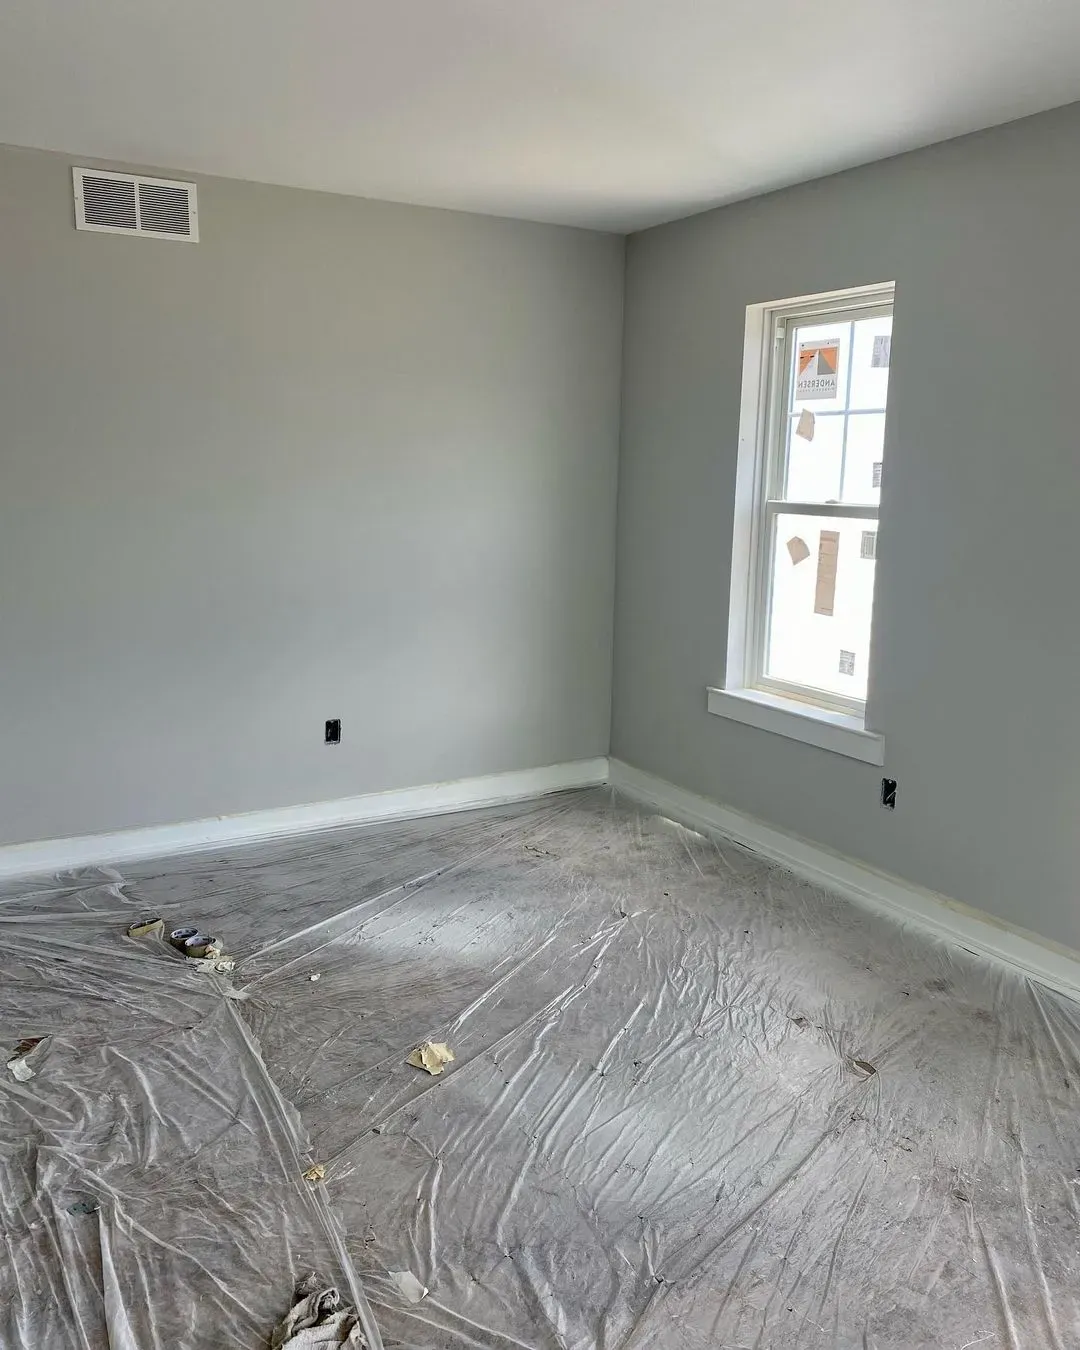 Sherwin Williams Crushed Ice bedroom paint